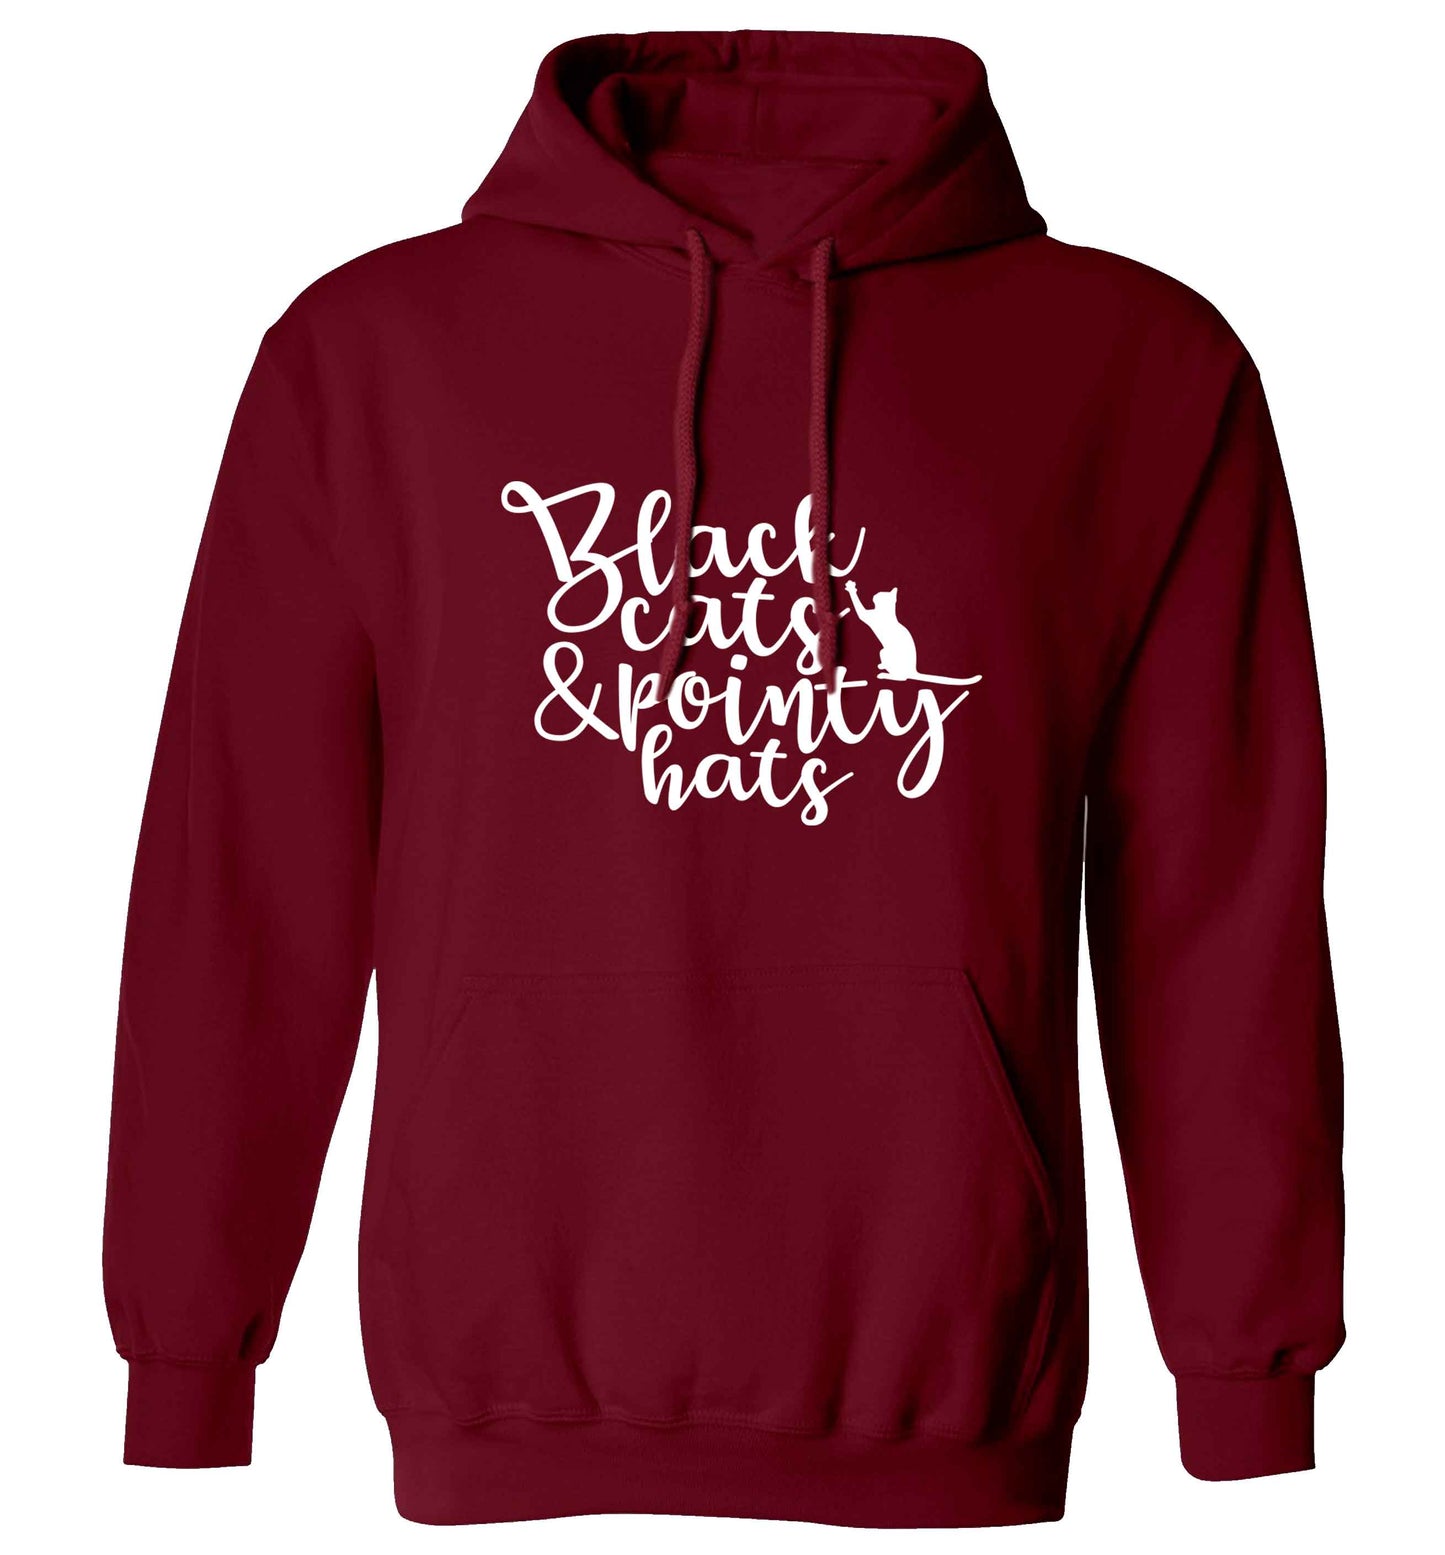 Black cats and pointy hats adults unisex maroon hoodie 2XL